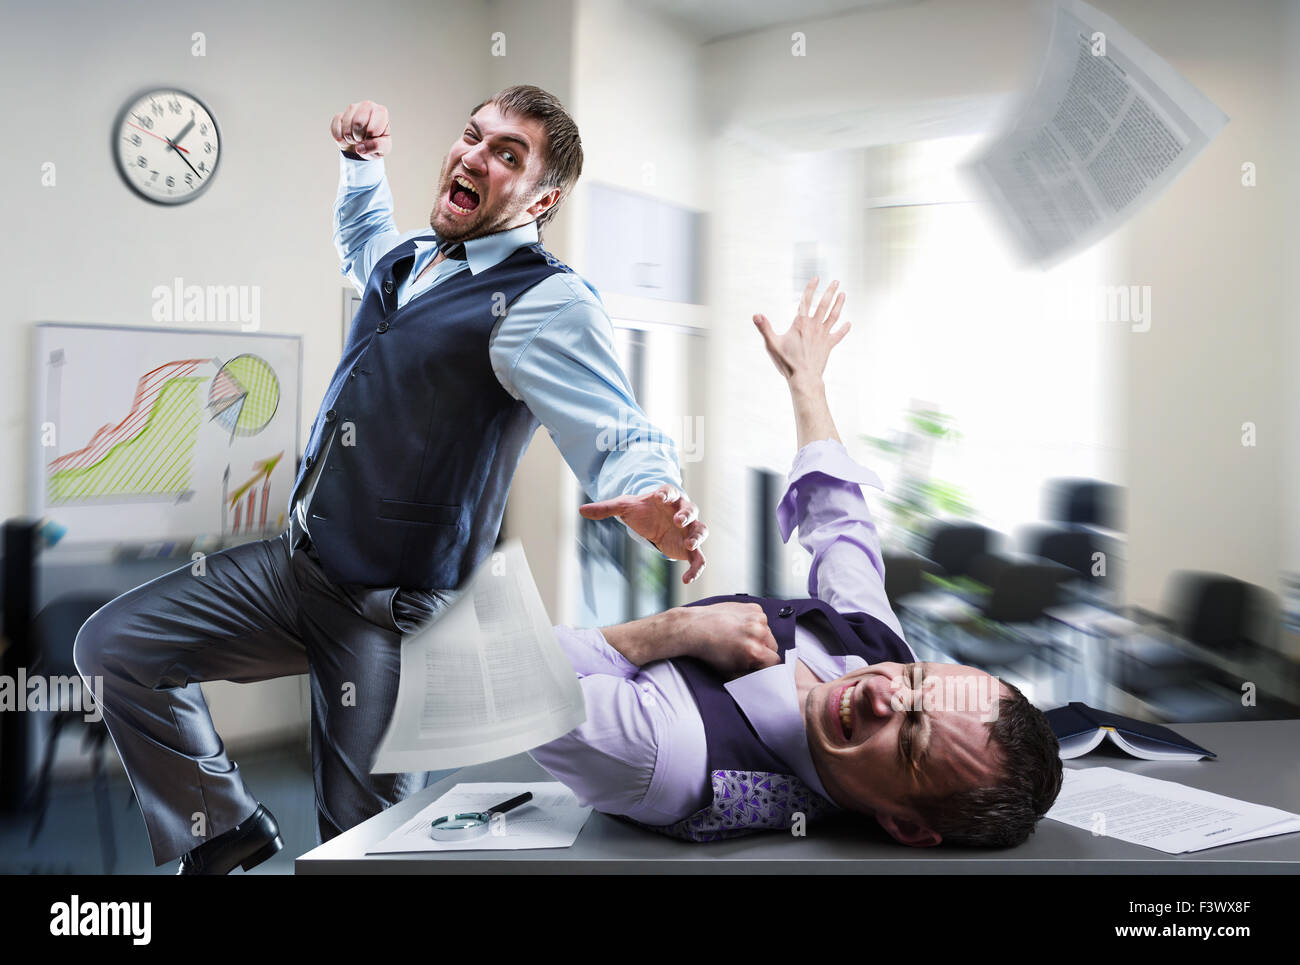 Two agressive businessmen fighting in the office Stock Photo